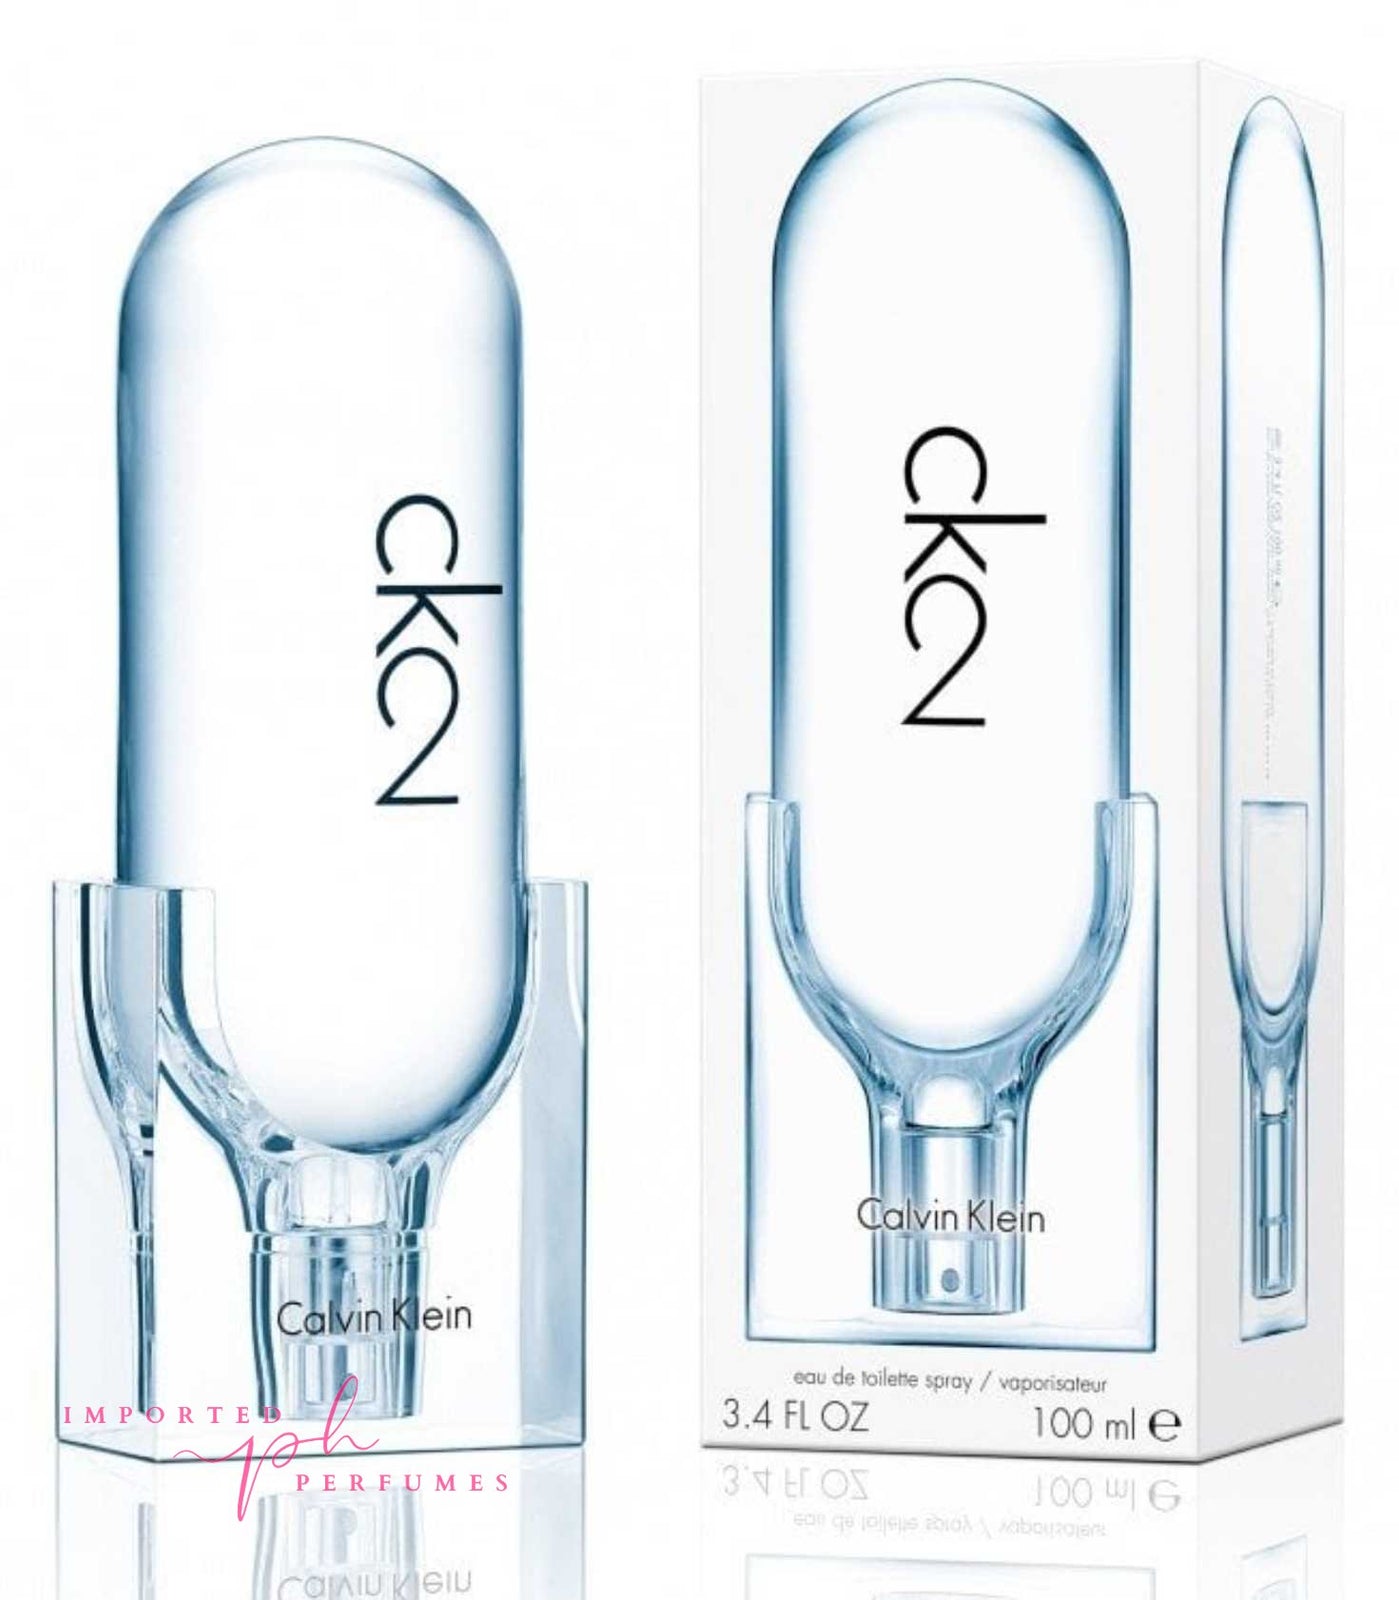 CK2 Calvin Klein EDT Unisex 100ml Imported Perfumes & Beauty Store